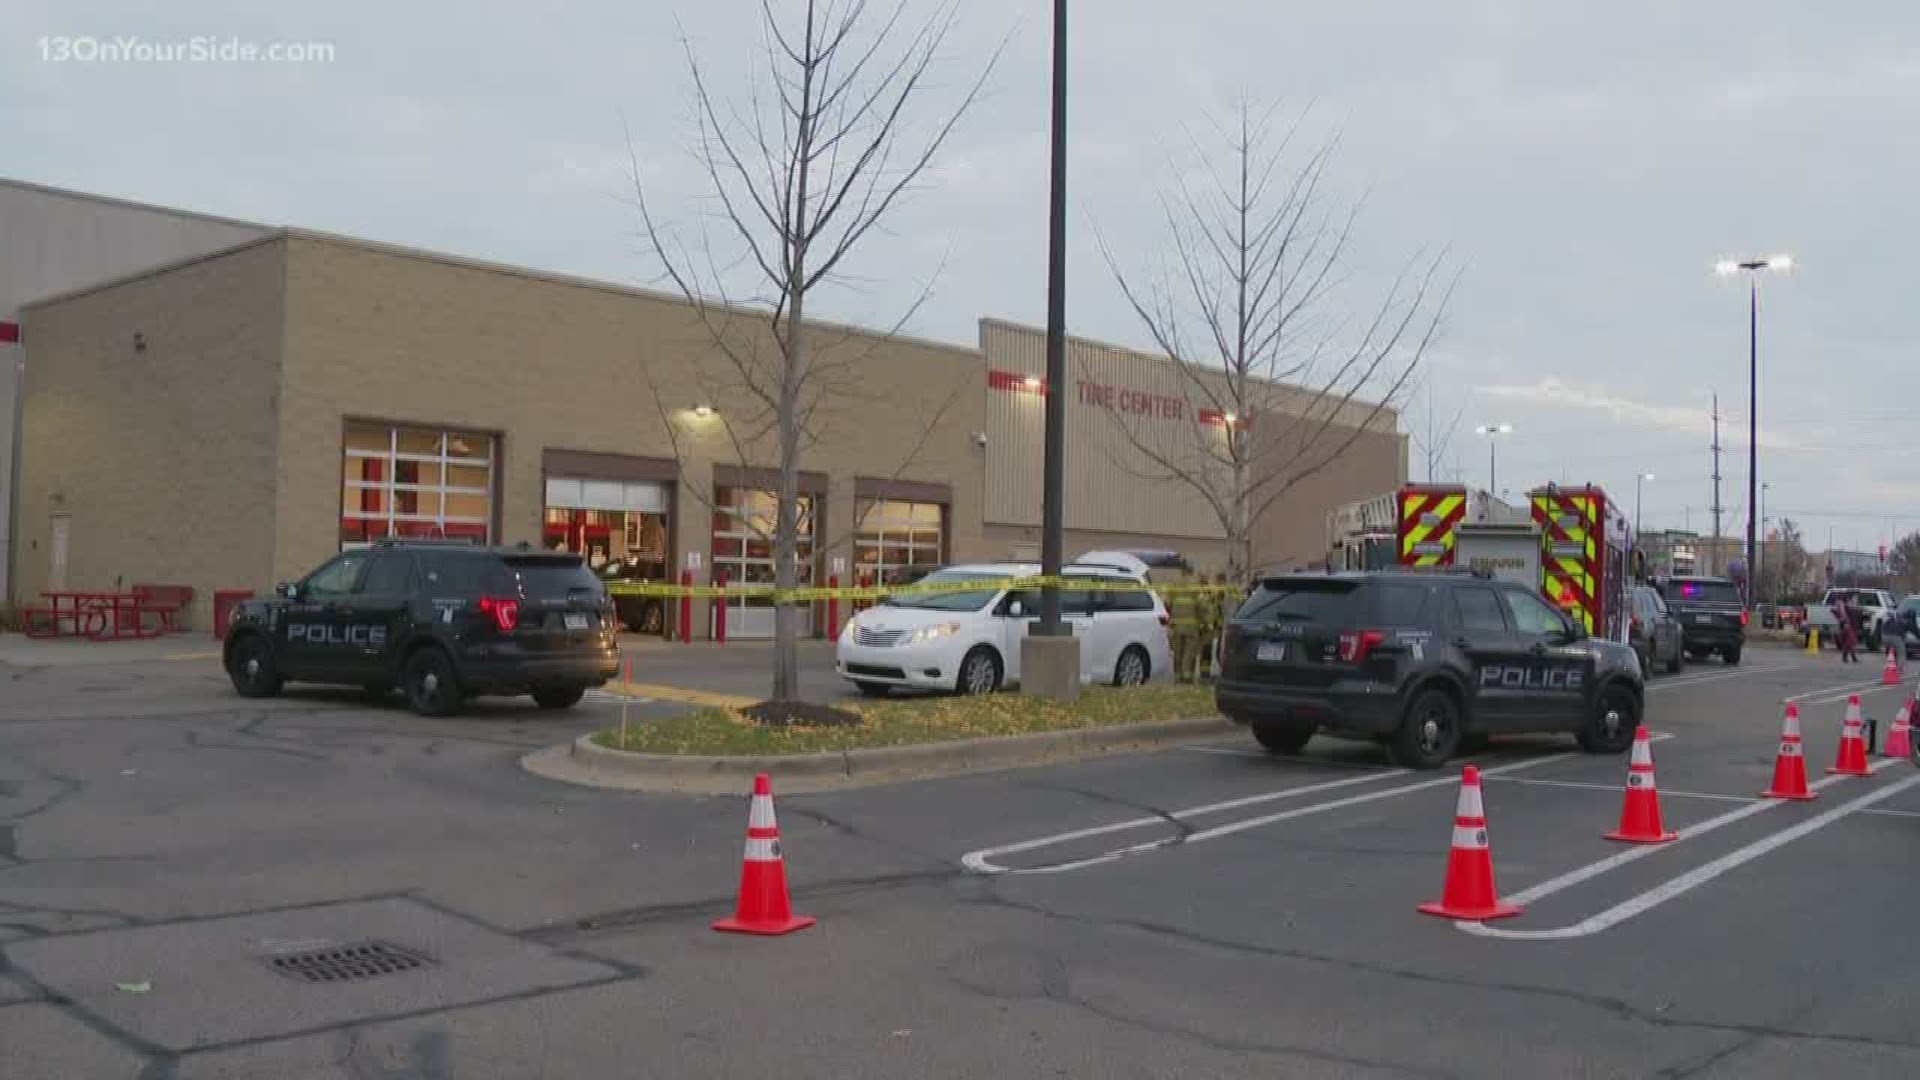 Charlotte Stein, 73, was hit and killed in the Costco parking lot near Grandville High School on Tuesday.